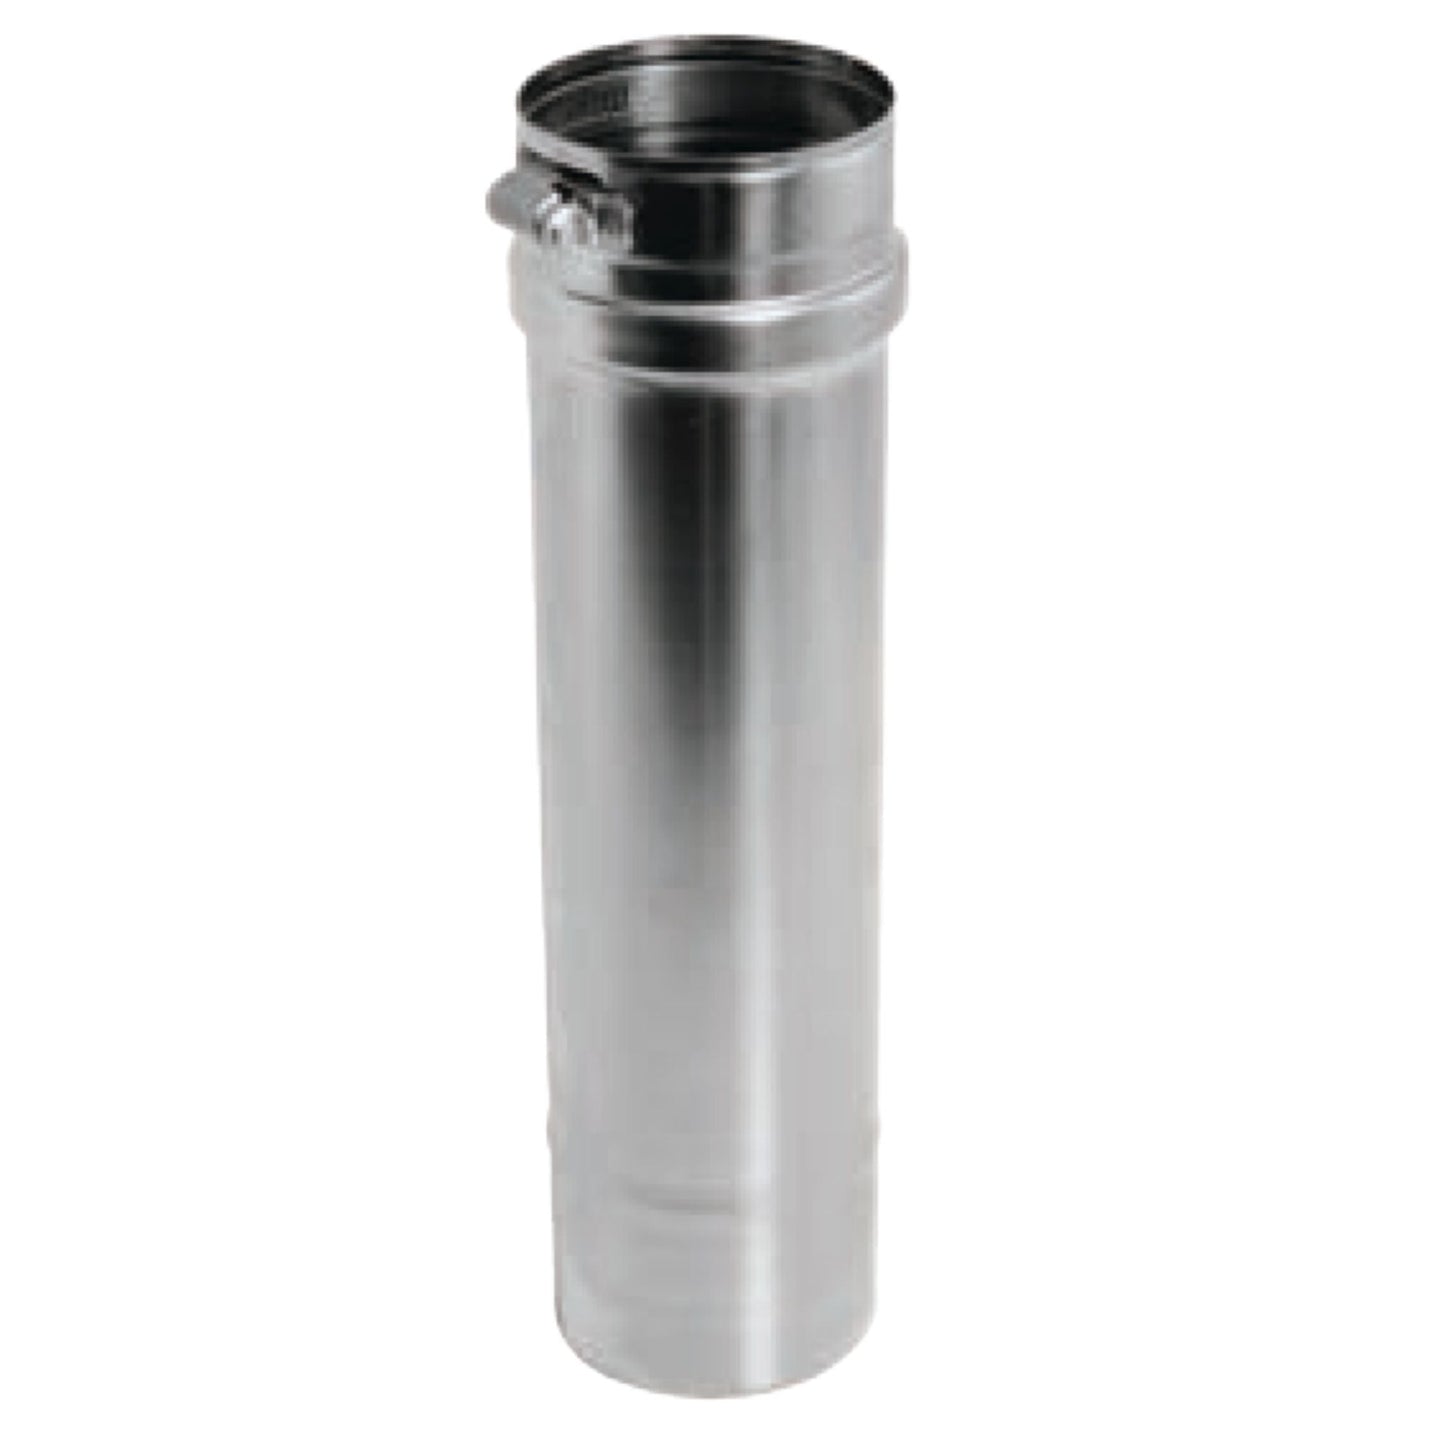 DuraVent FasNSeal 7" x 36" 316L Stainless Steel Vent Length